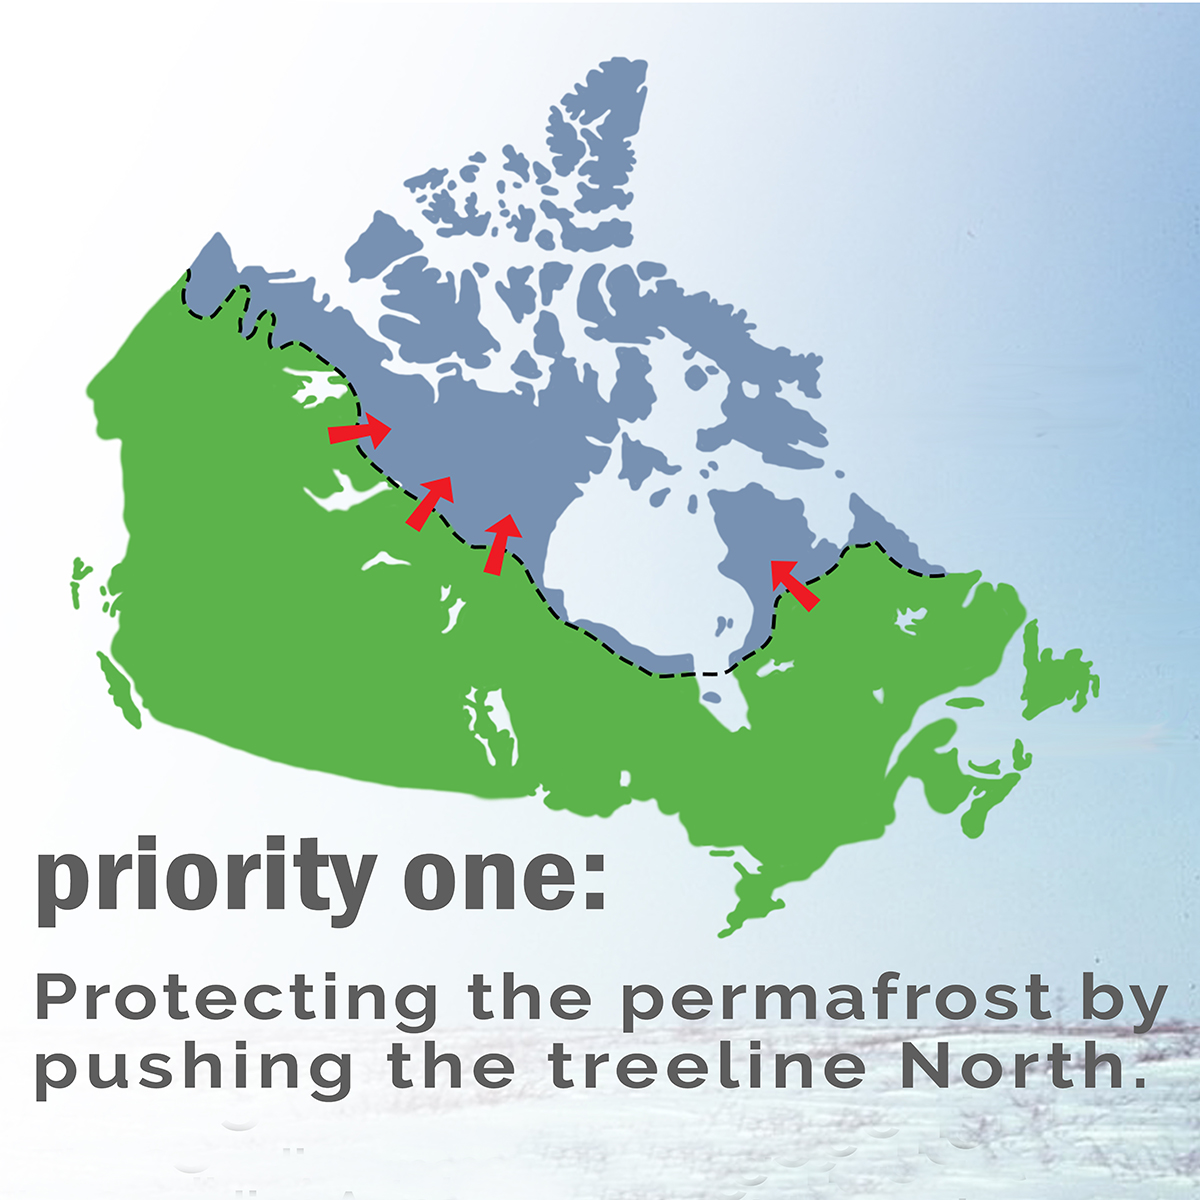 Priority One, Pushing the Treeline North to protect the permafrost